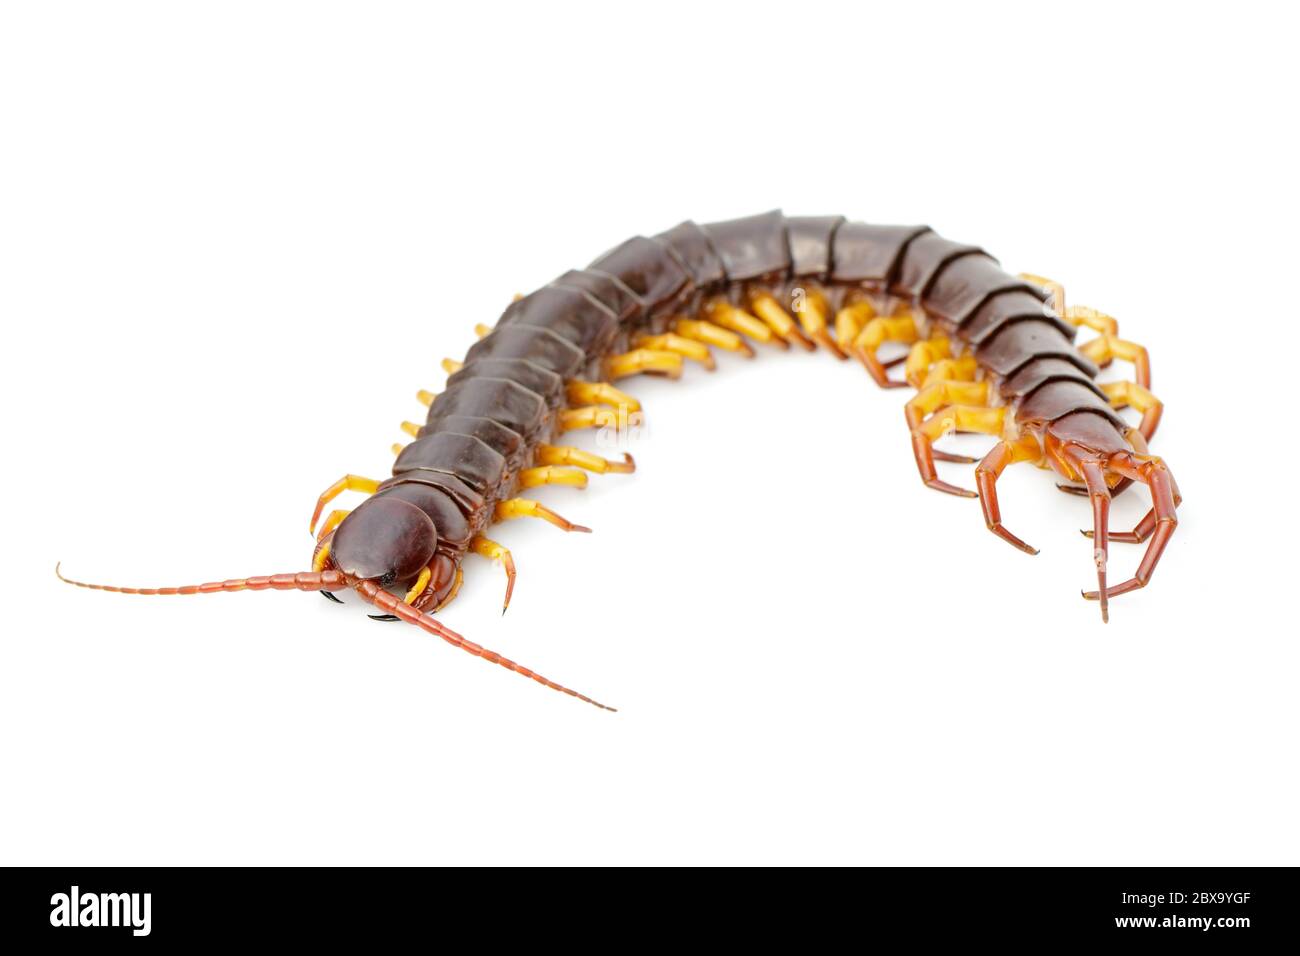 Image of centipedes or chilopoda isolated on white background. Animal. Poisonous animals. Stock Photo